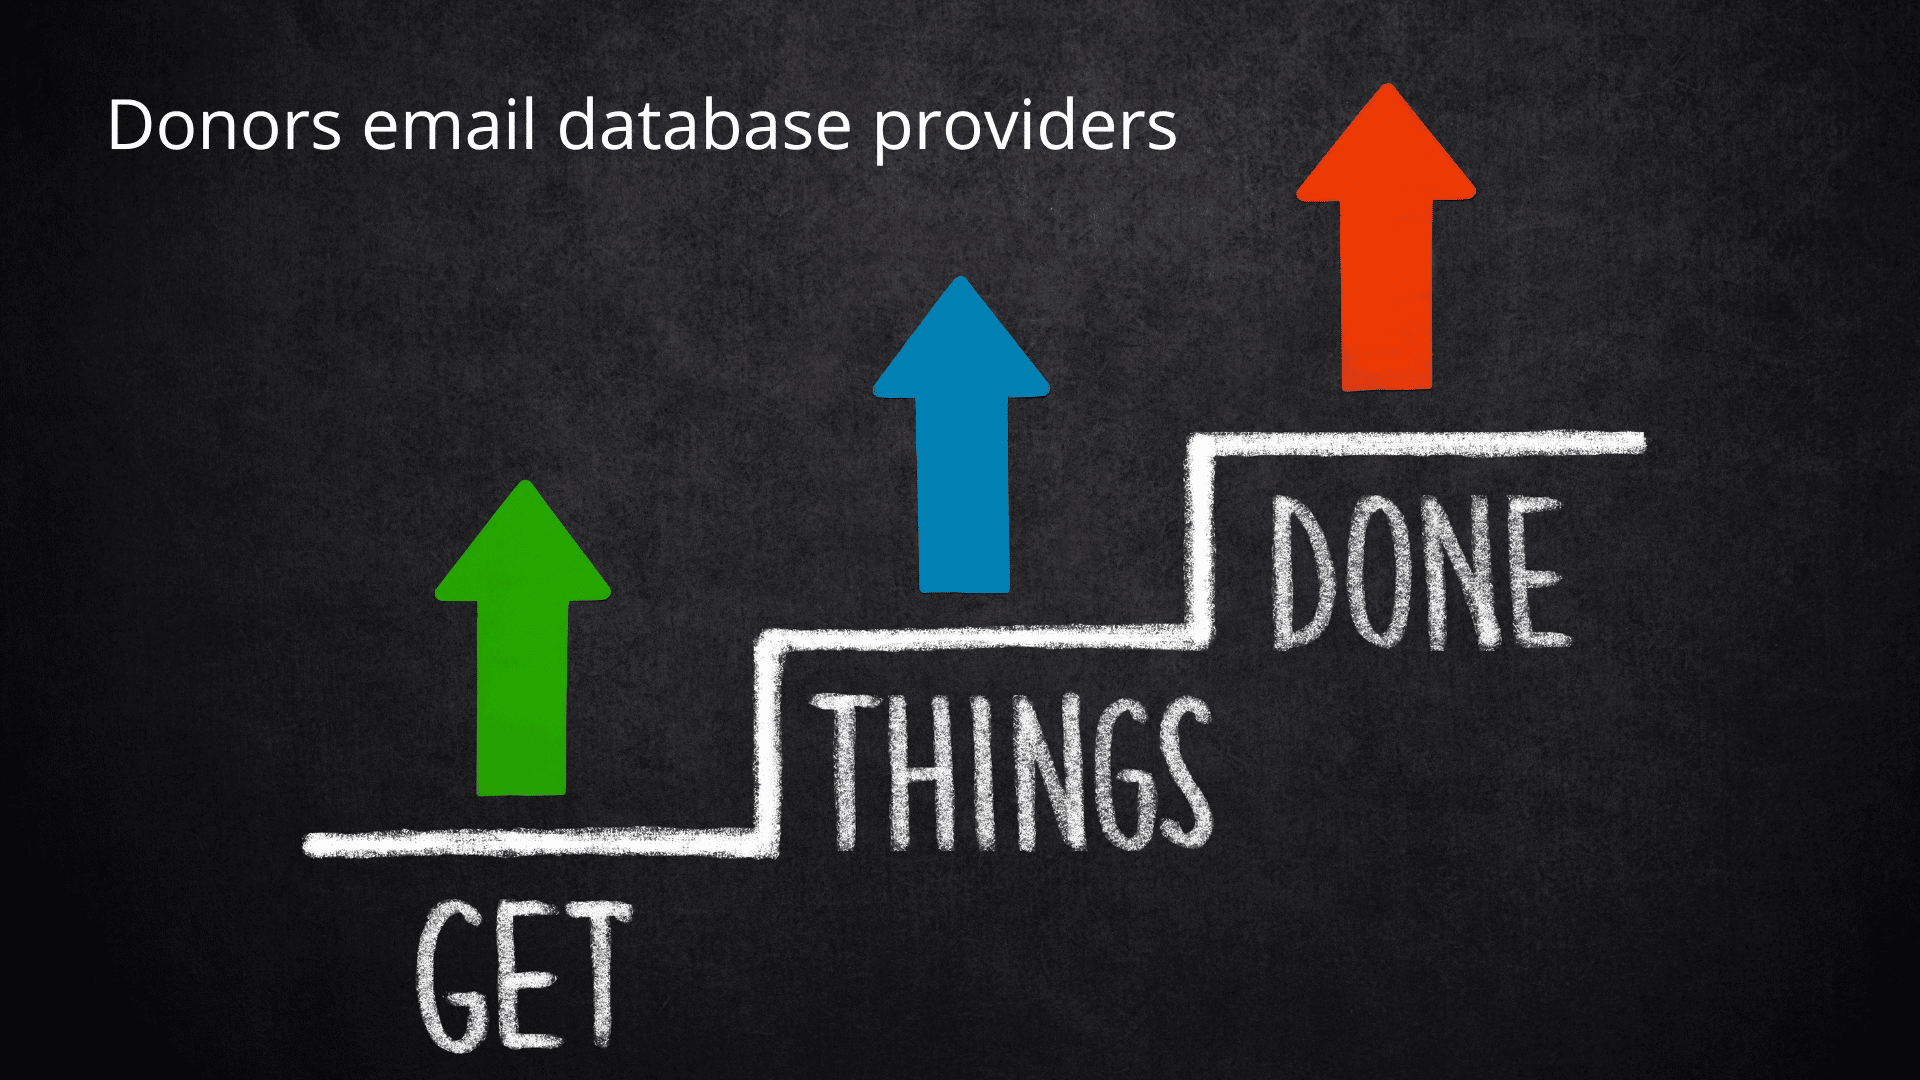 Donors email database providers